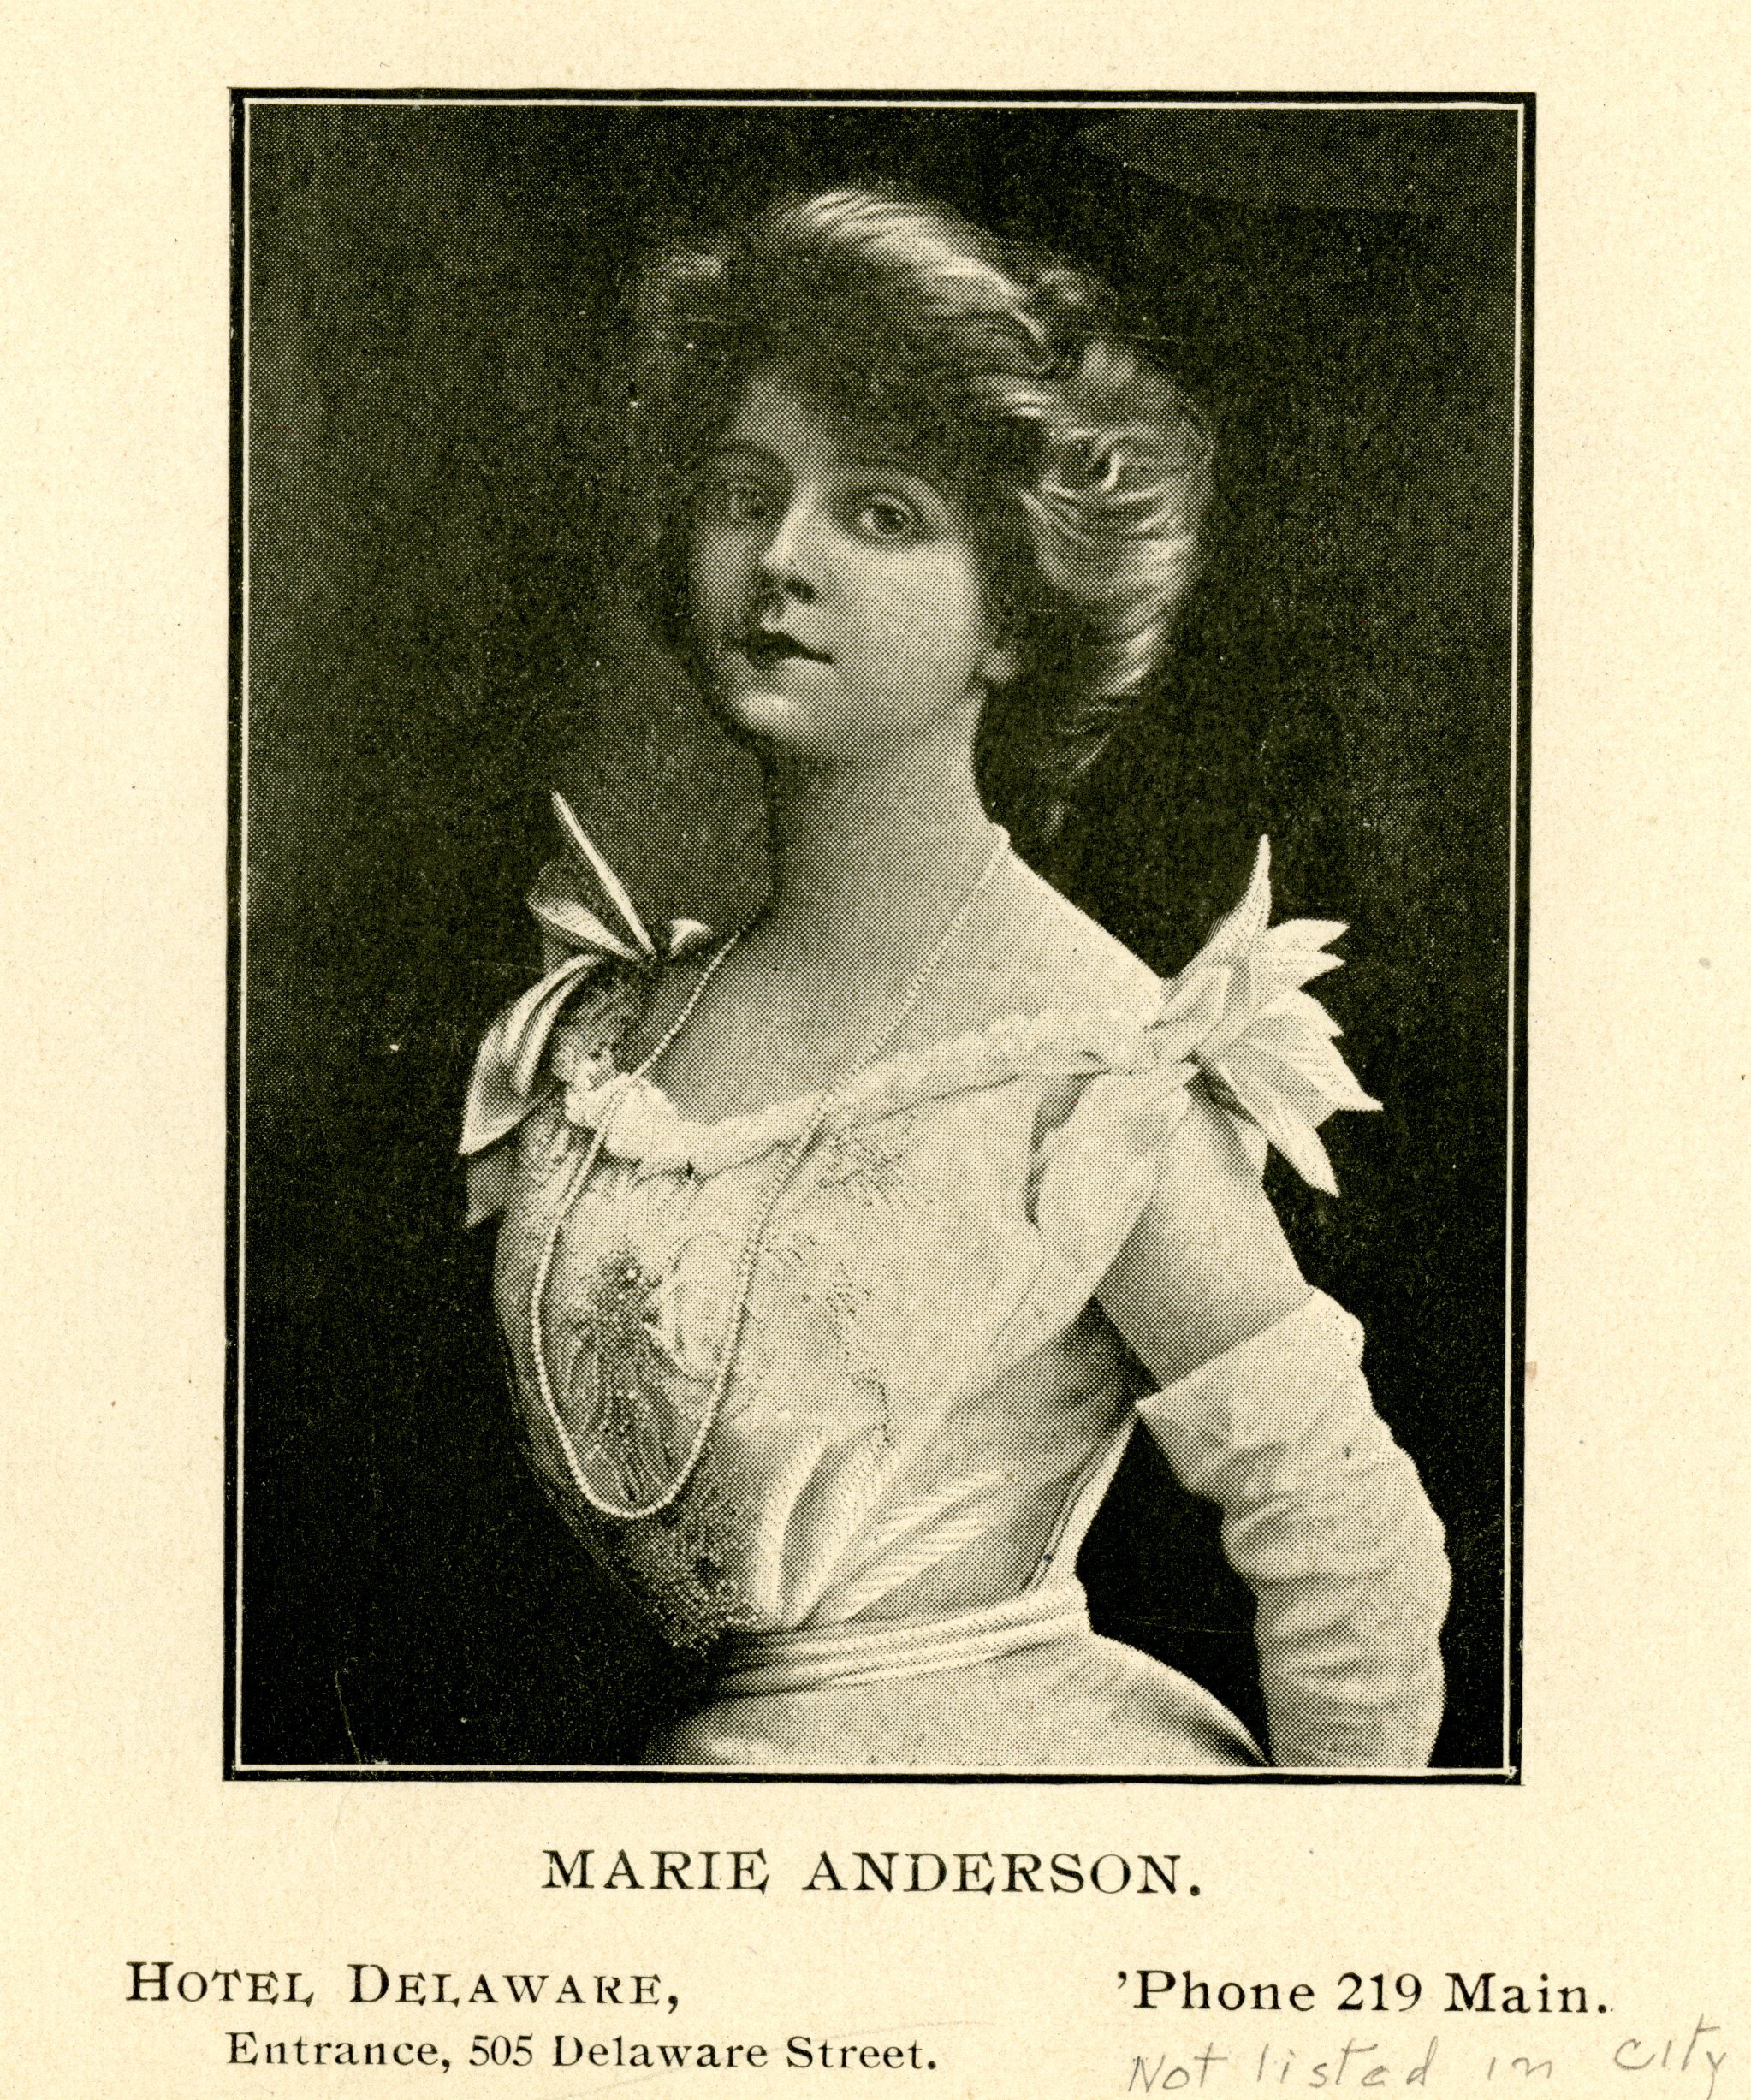 City Directory Portrait of Marie Anderson